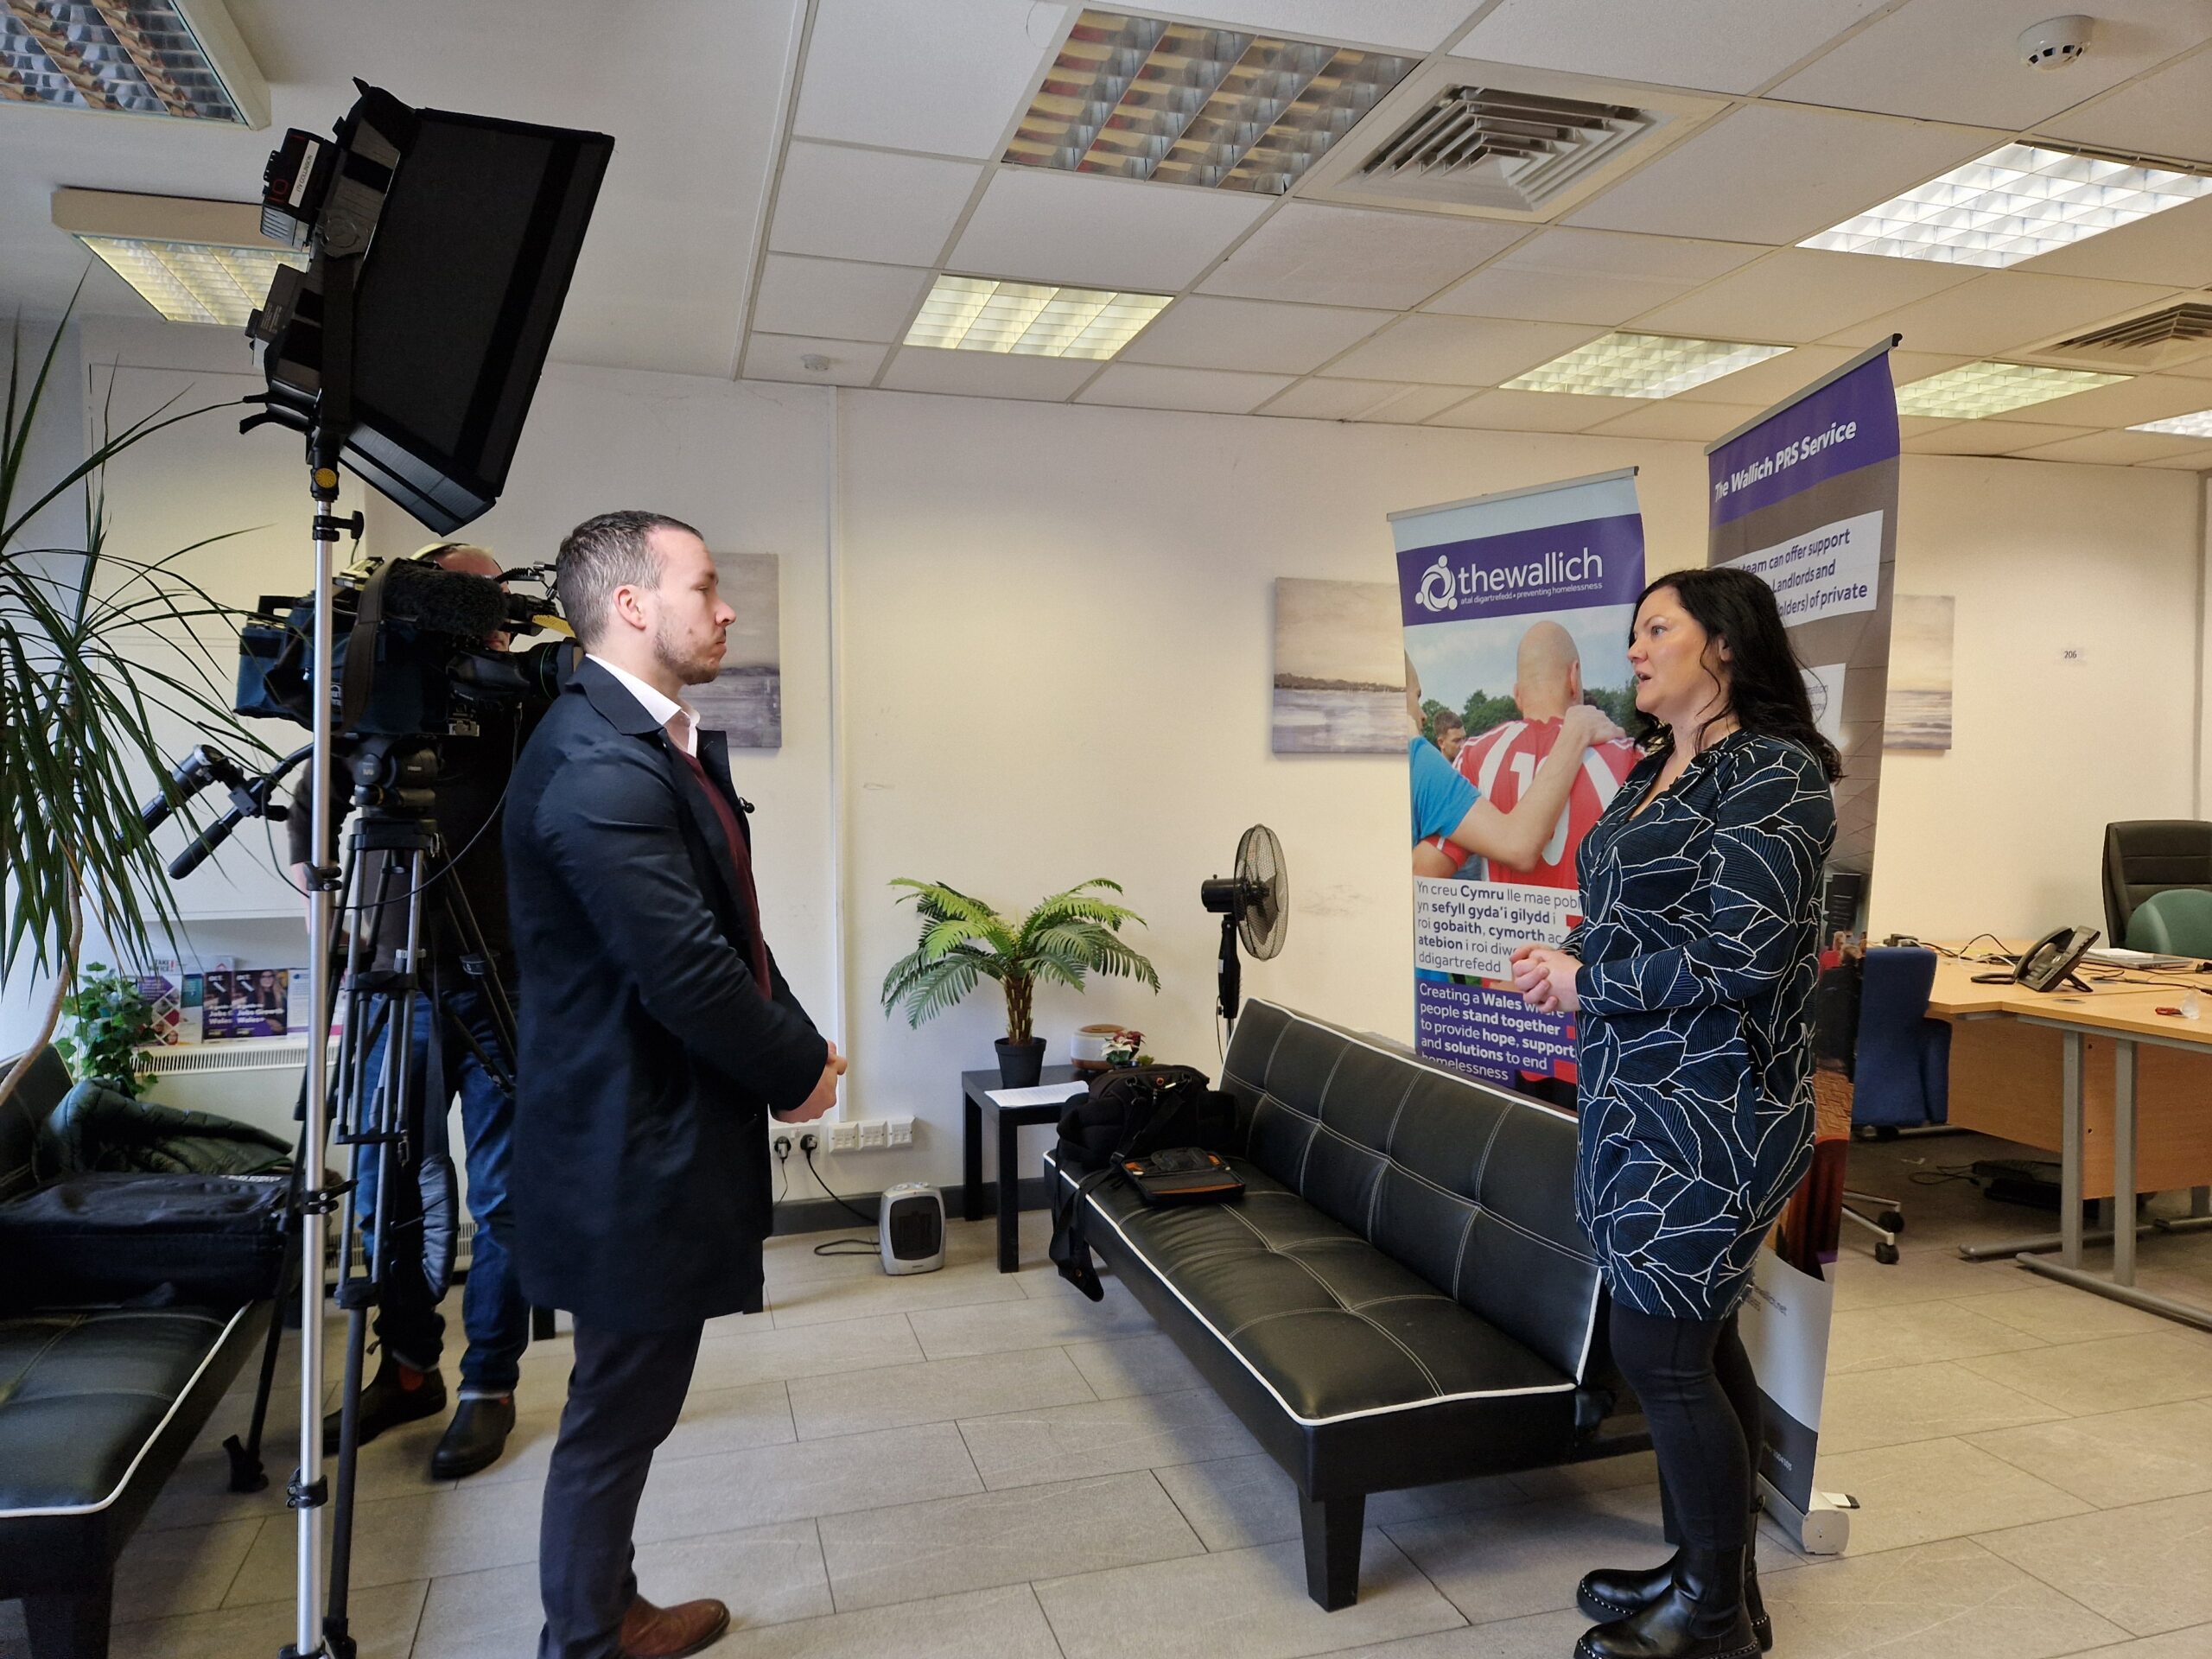 CEO from The Wallich interview with TV camera